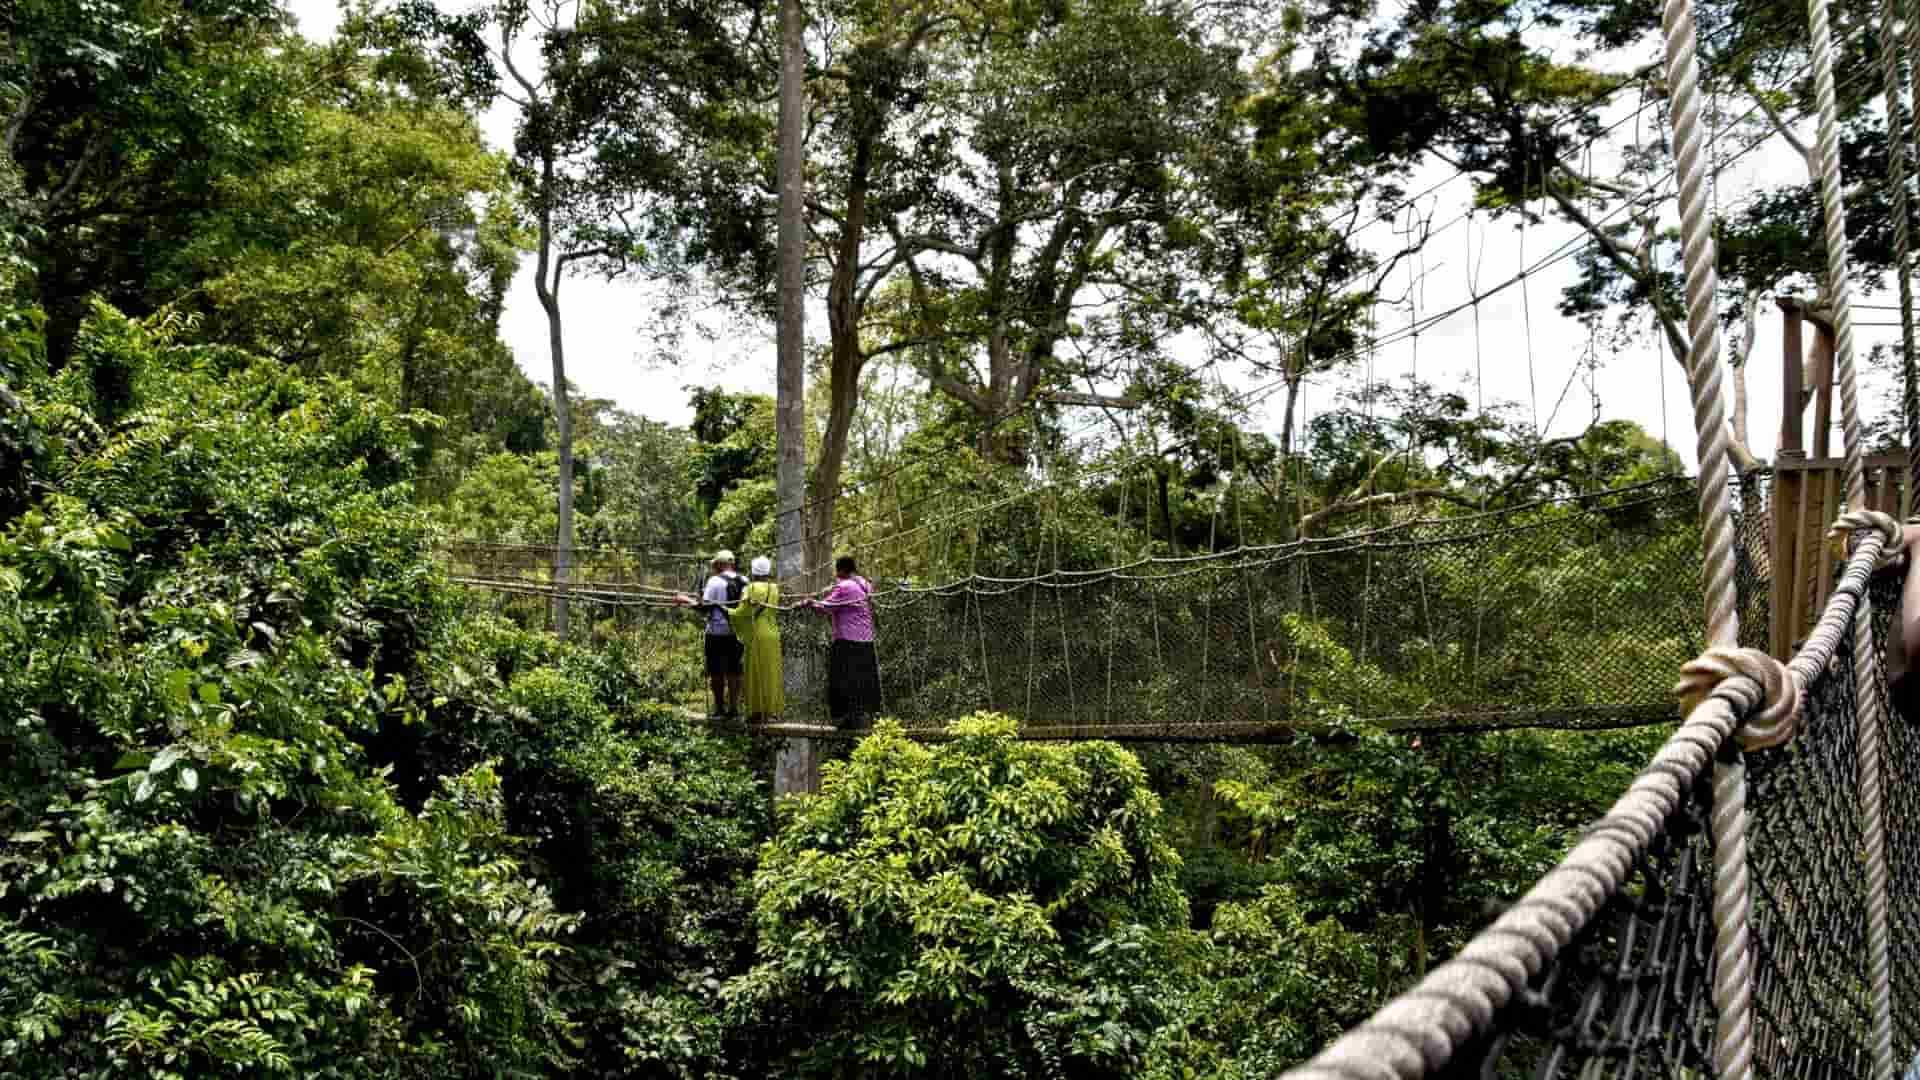 A canopy suspension bridge nestled in lush green foliage. Three people stand on the bridge holding onto the ropes, admiring the dense greenery surrounding them.